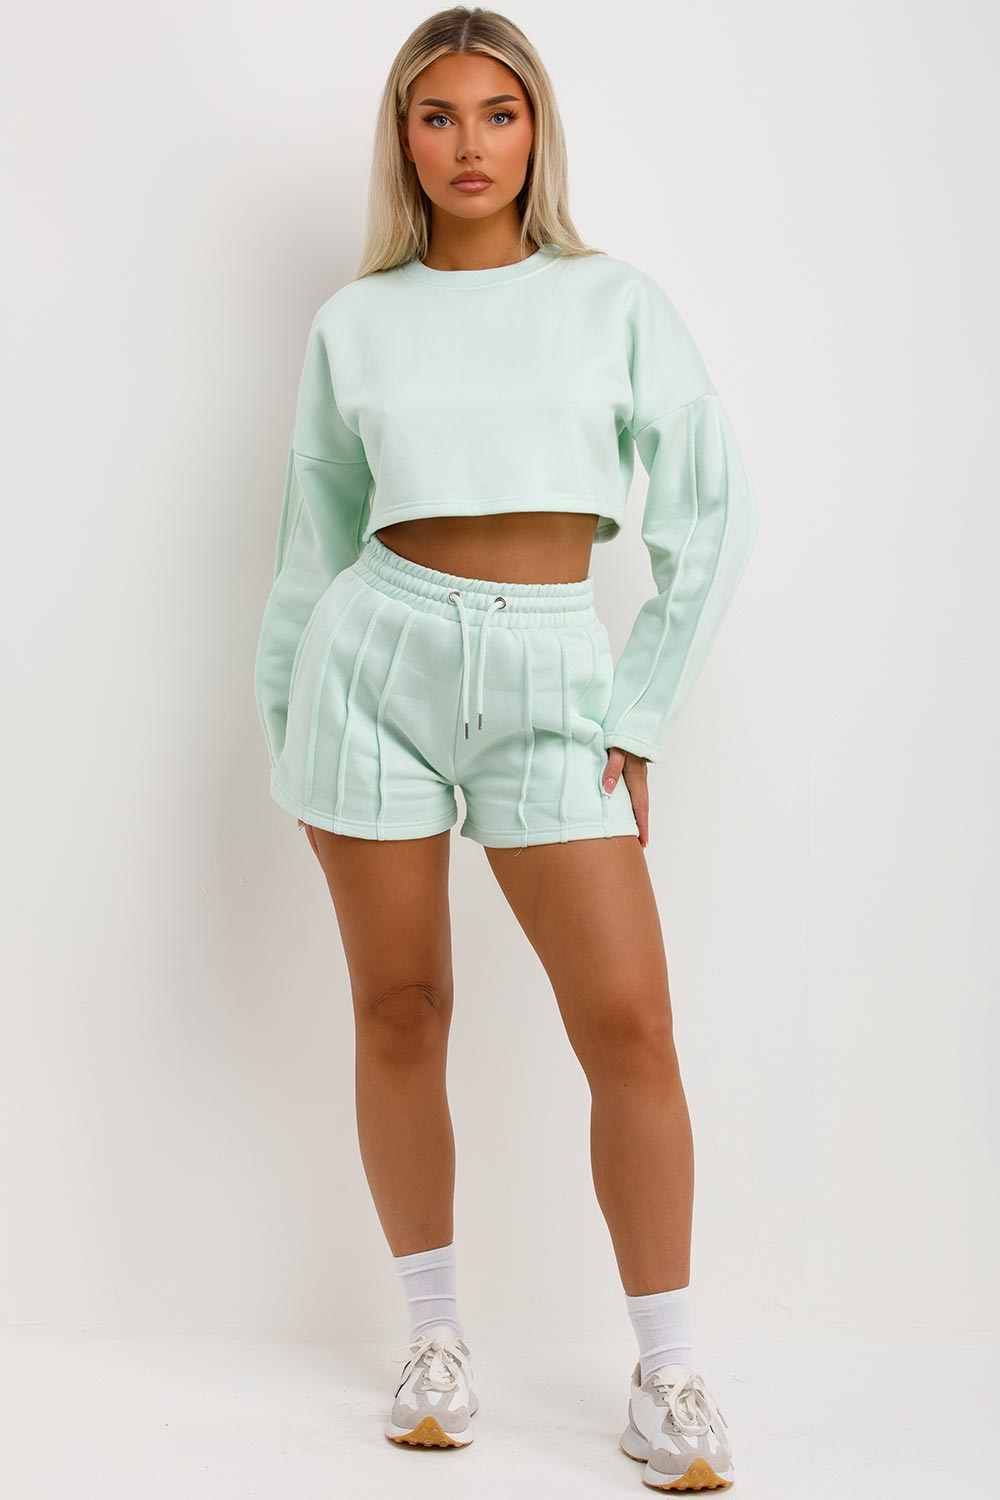 womens shorts and jumper tracksuit set 